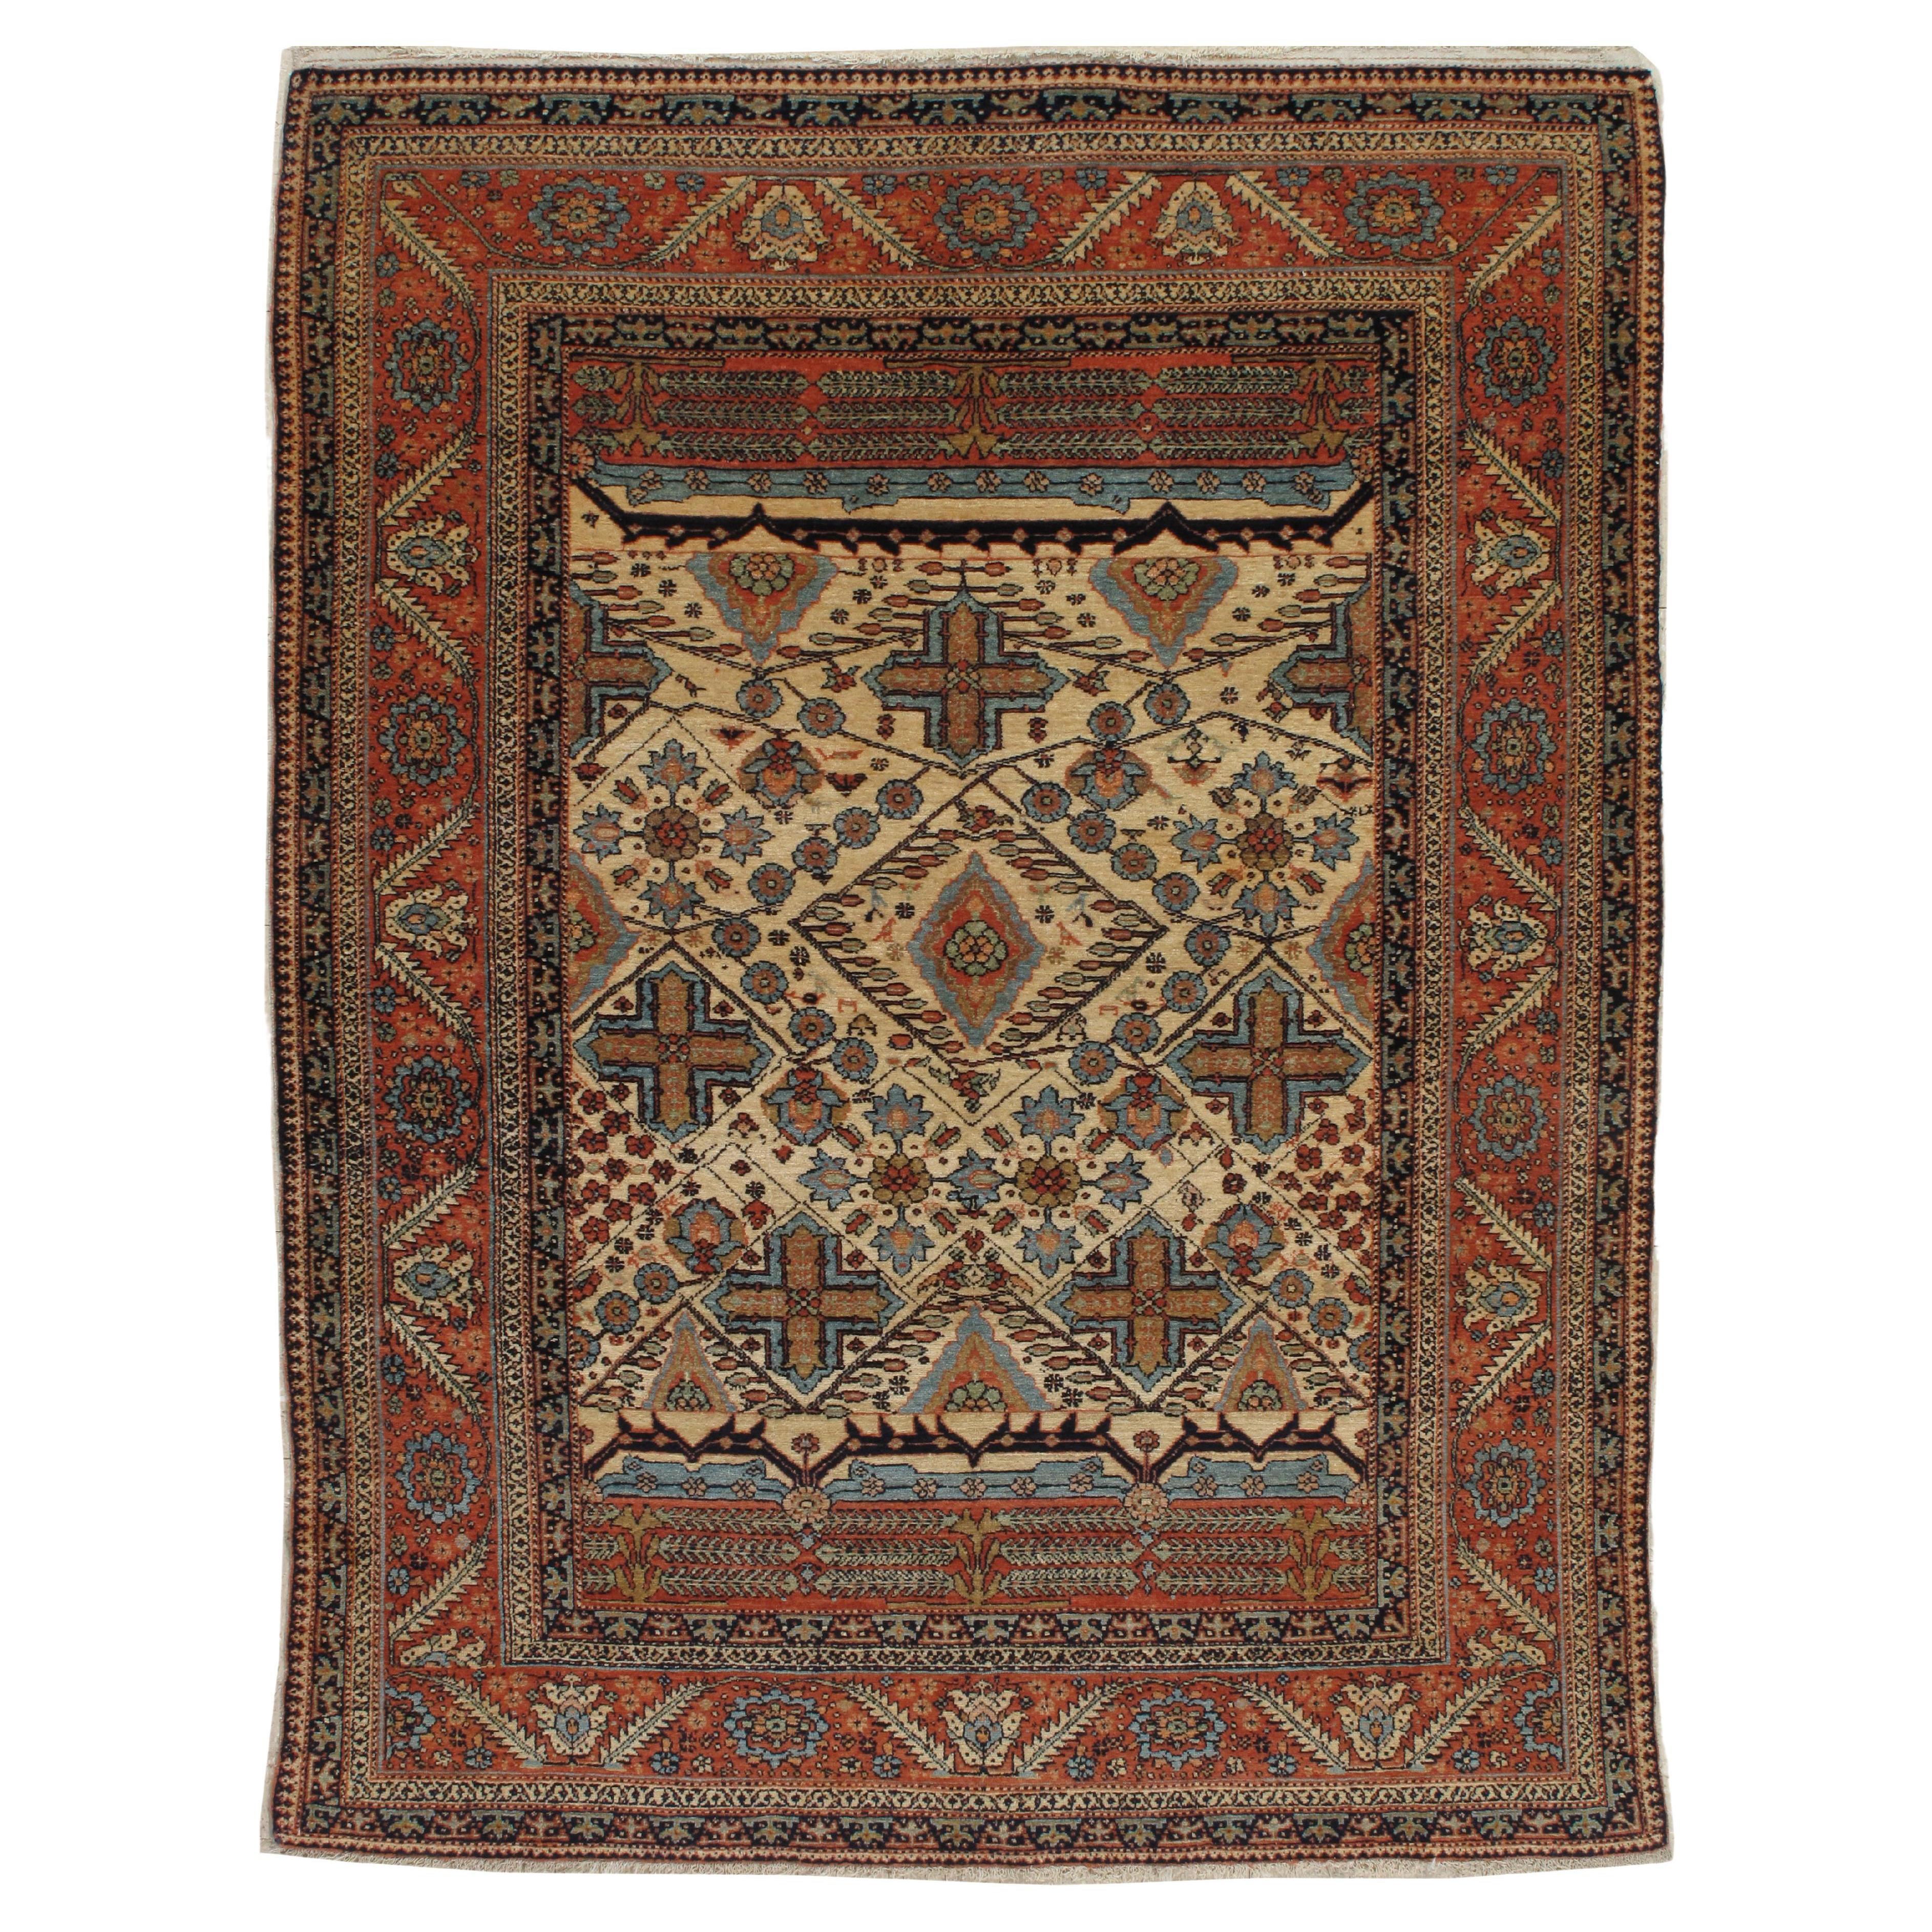 Antique Persian Bakhshaish Carpet, Handmade Wool Rug, Ivory and Rust For Sale